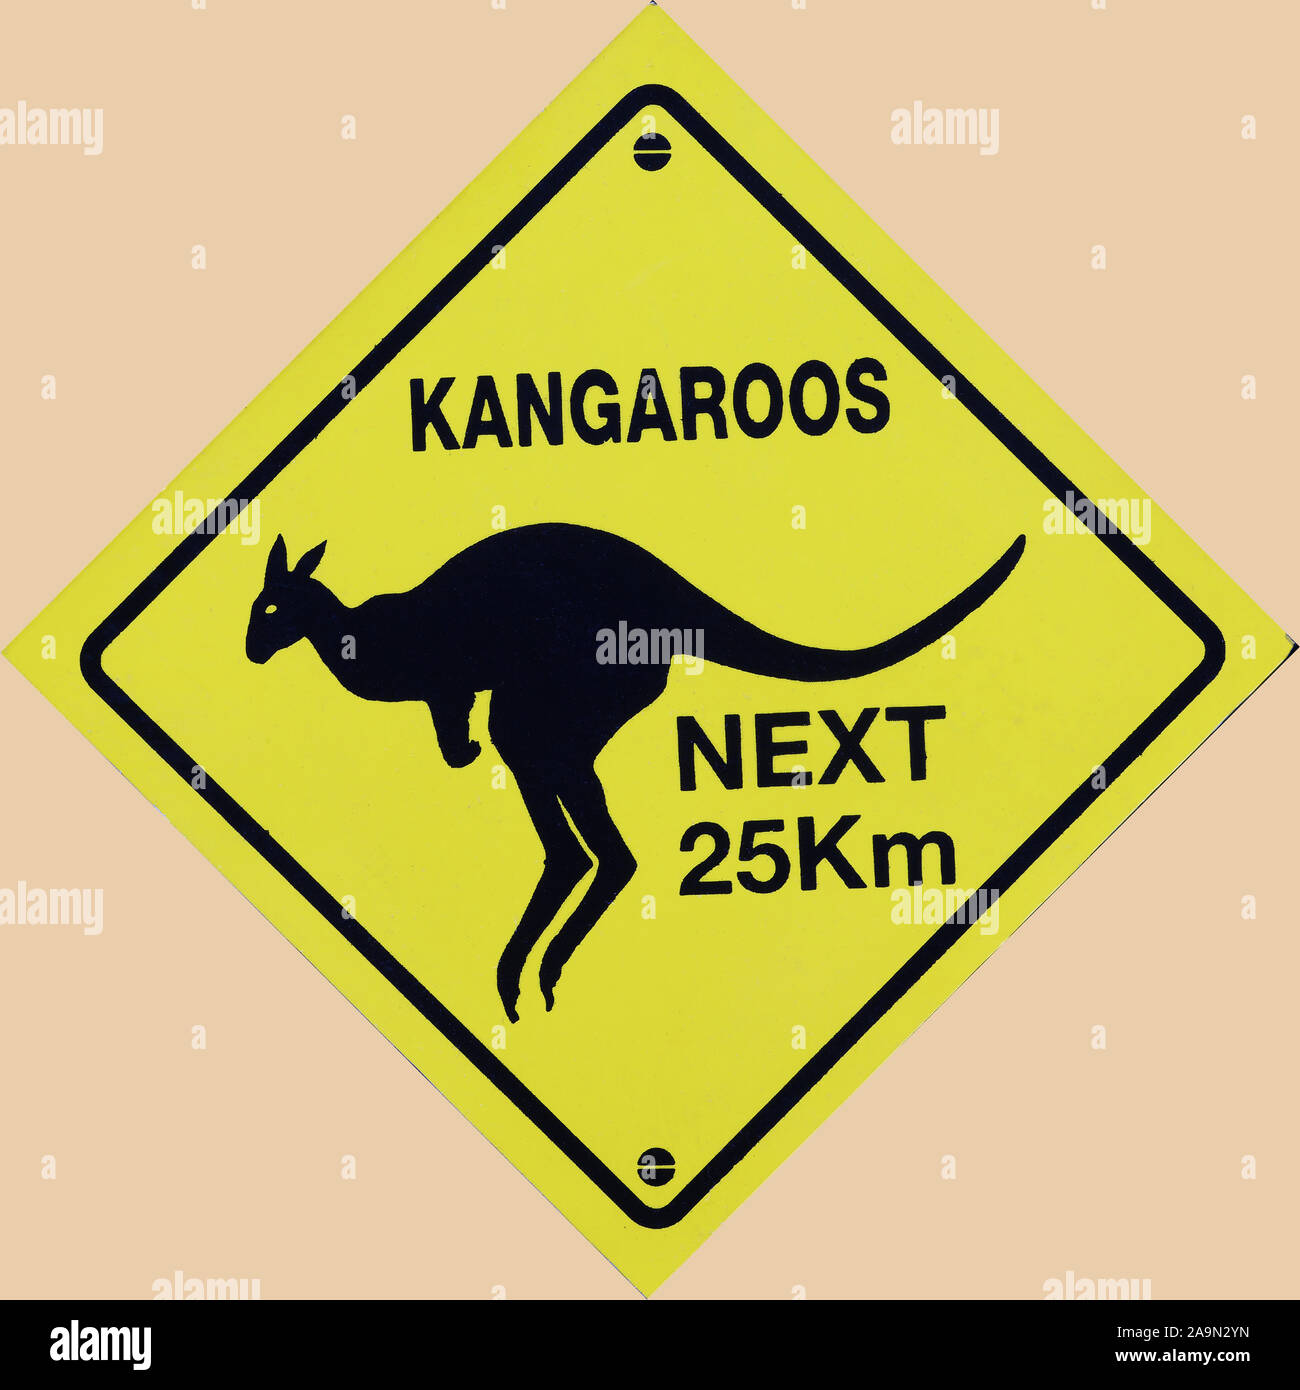 Copy of road sign warning about kangaroo crossing in Australia Stock Photo